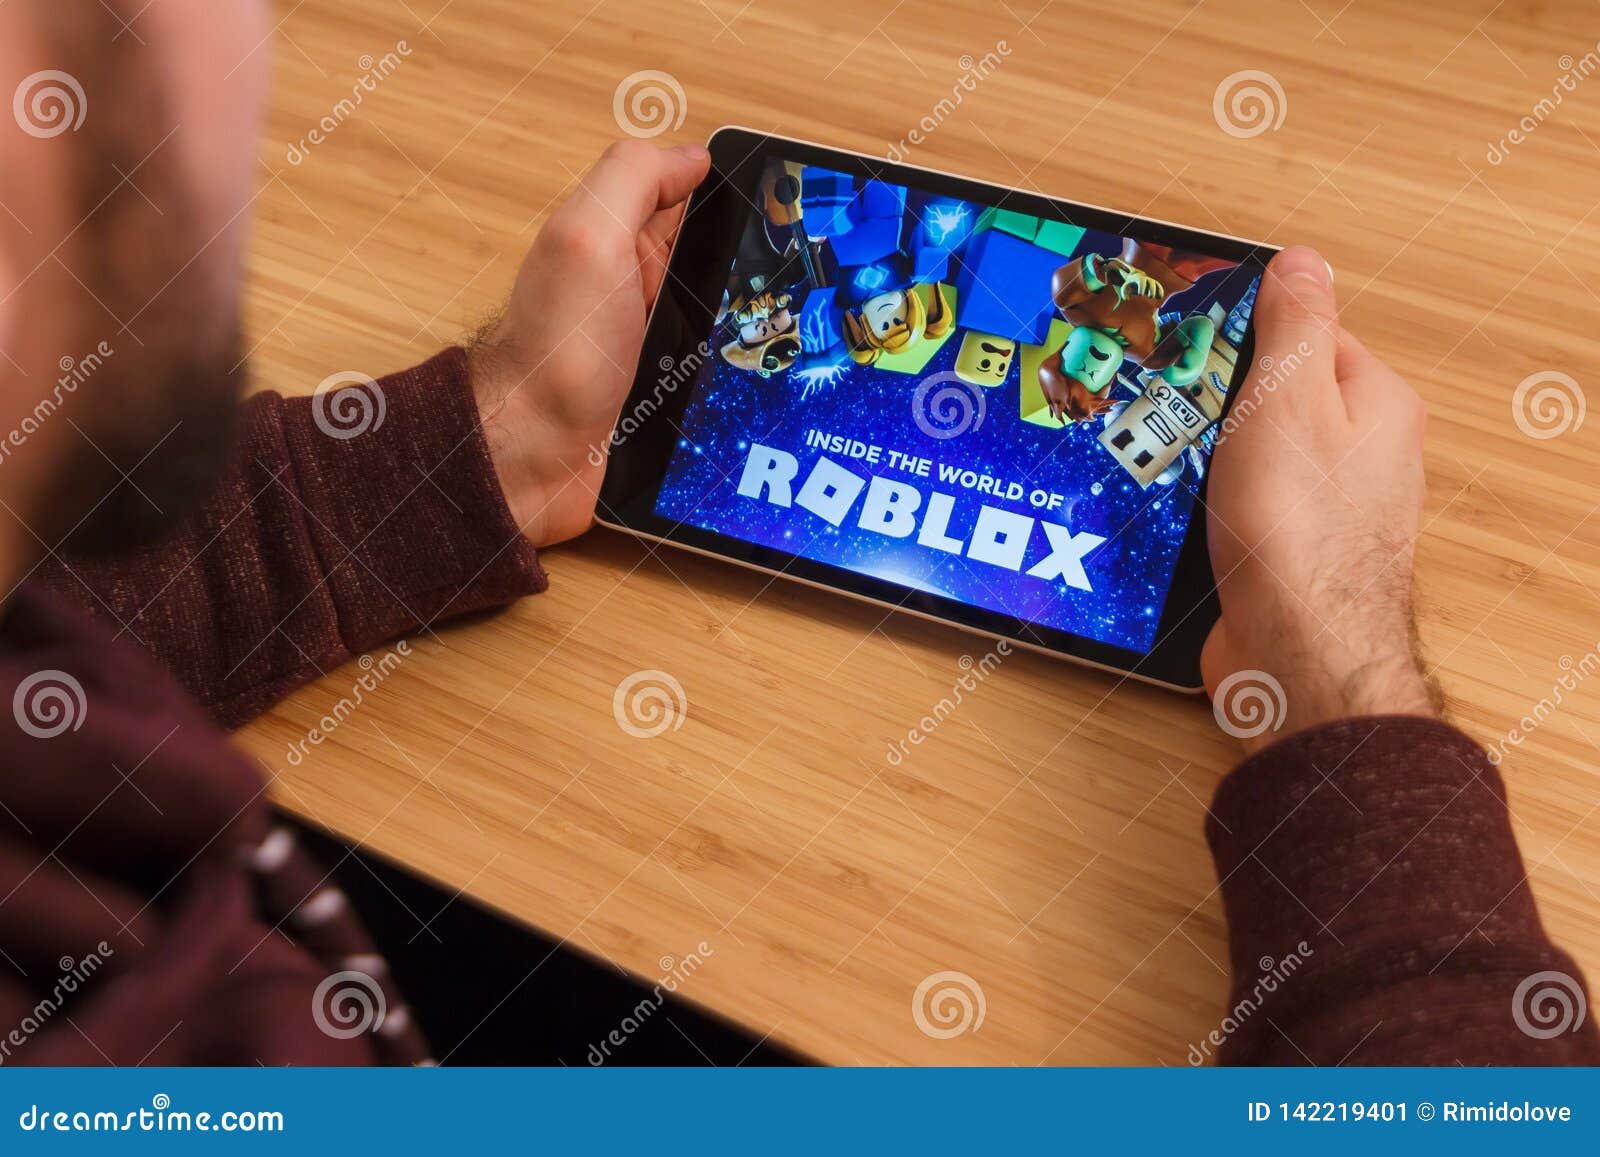 Prague Czech Republic March 16 2019 Man Holding A Smartphone And Playng The Roblox Mobile Game An Illustrative Editorial Editorial Photo Image Of Application Editorial 142219401 - roblox 16